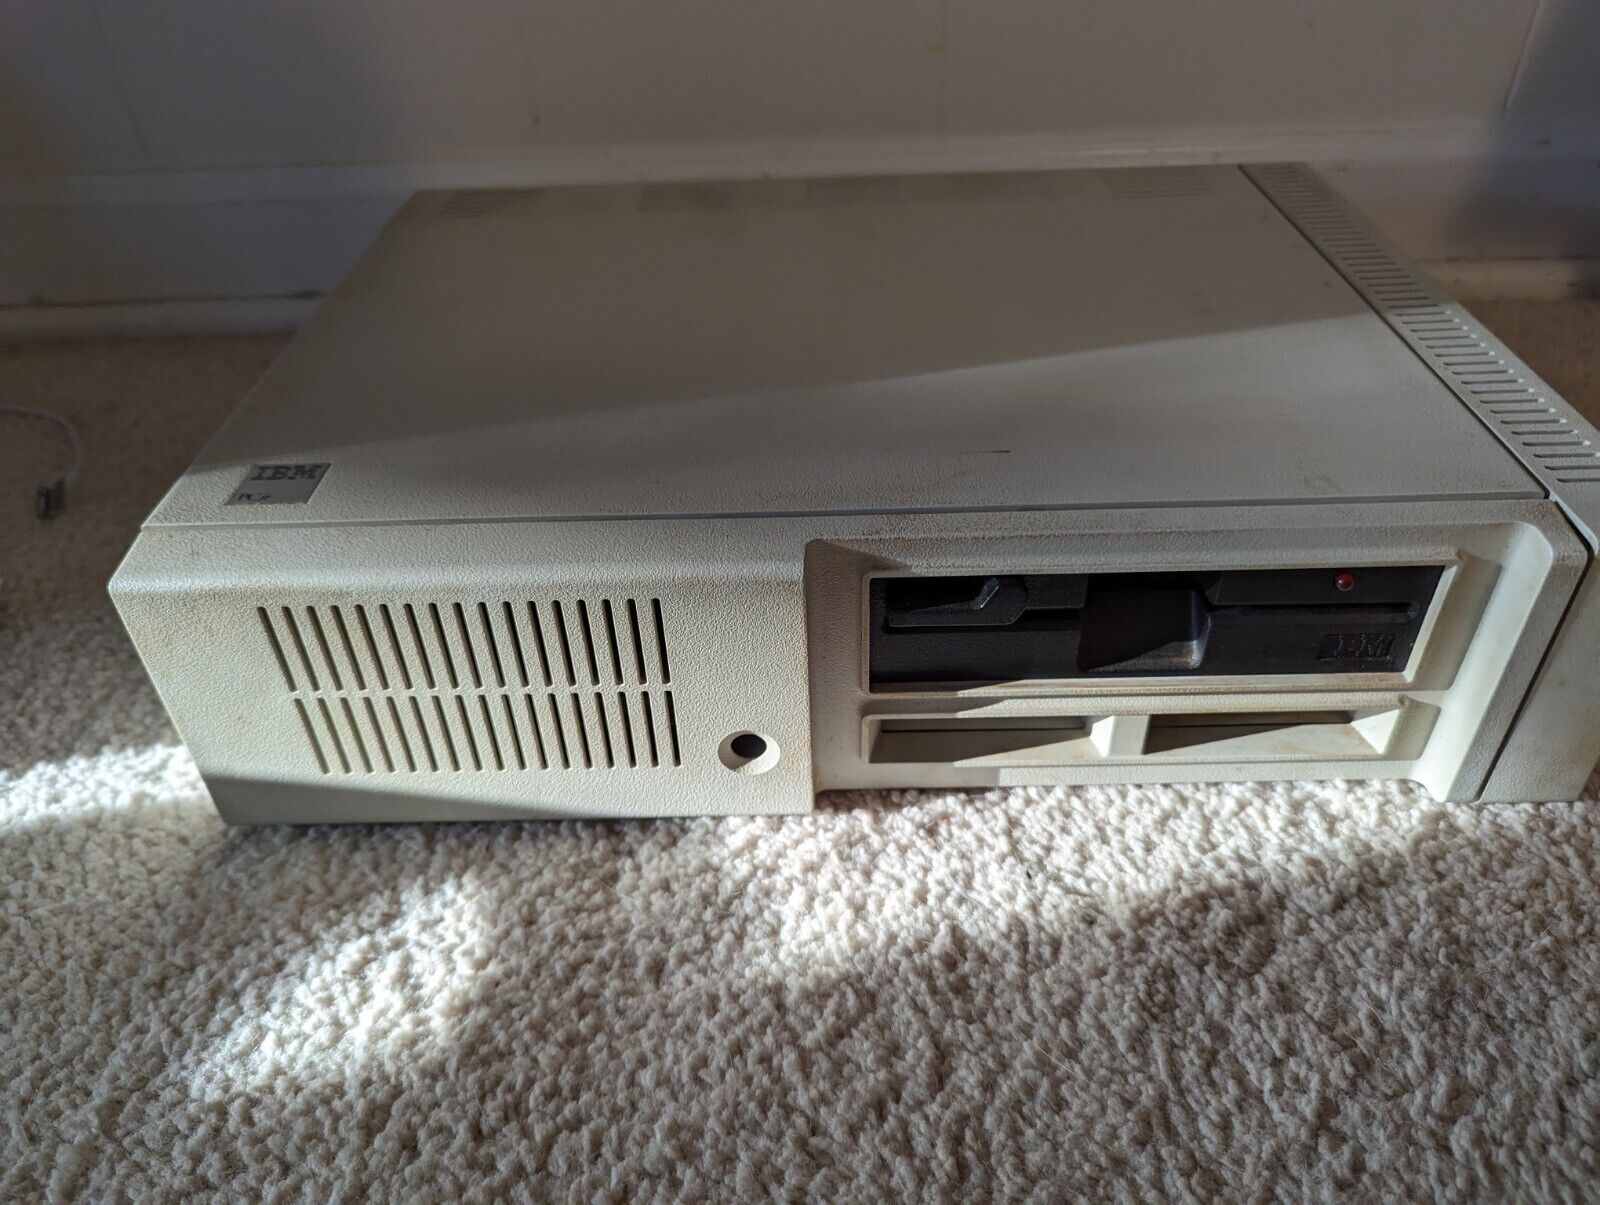 IBM PCjr 4860 JR  No Power Cords Included Untested